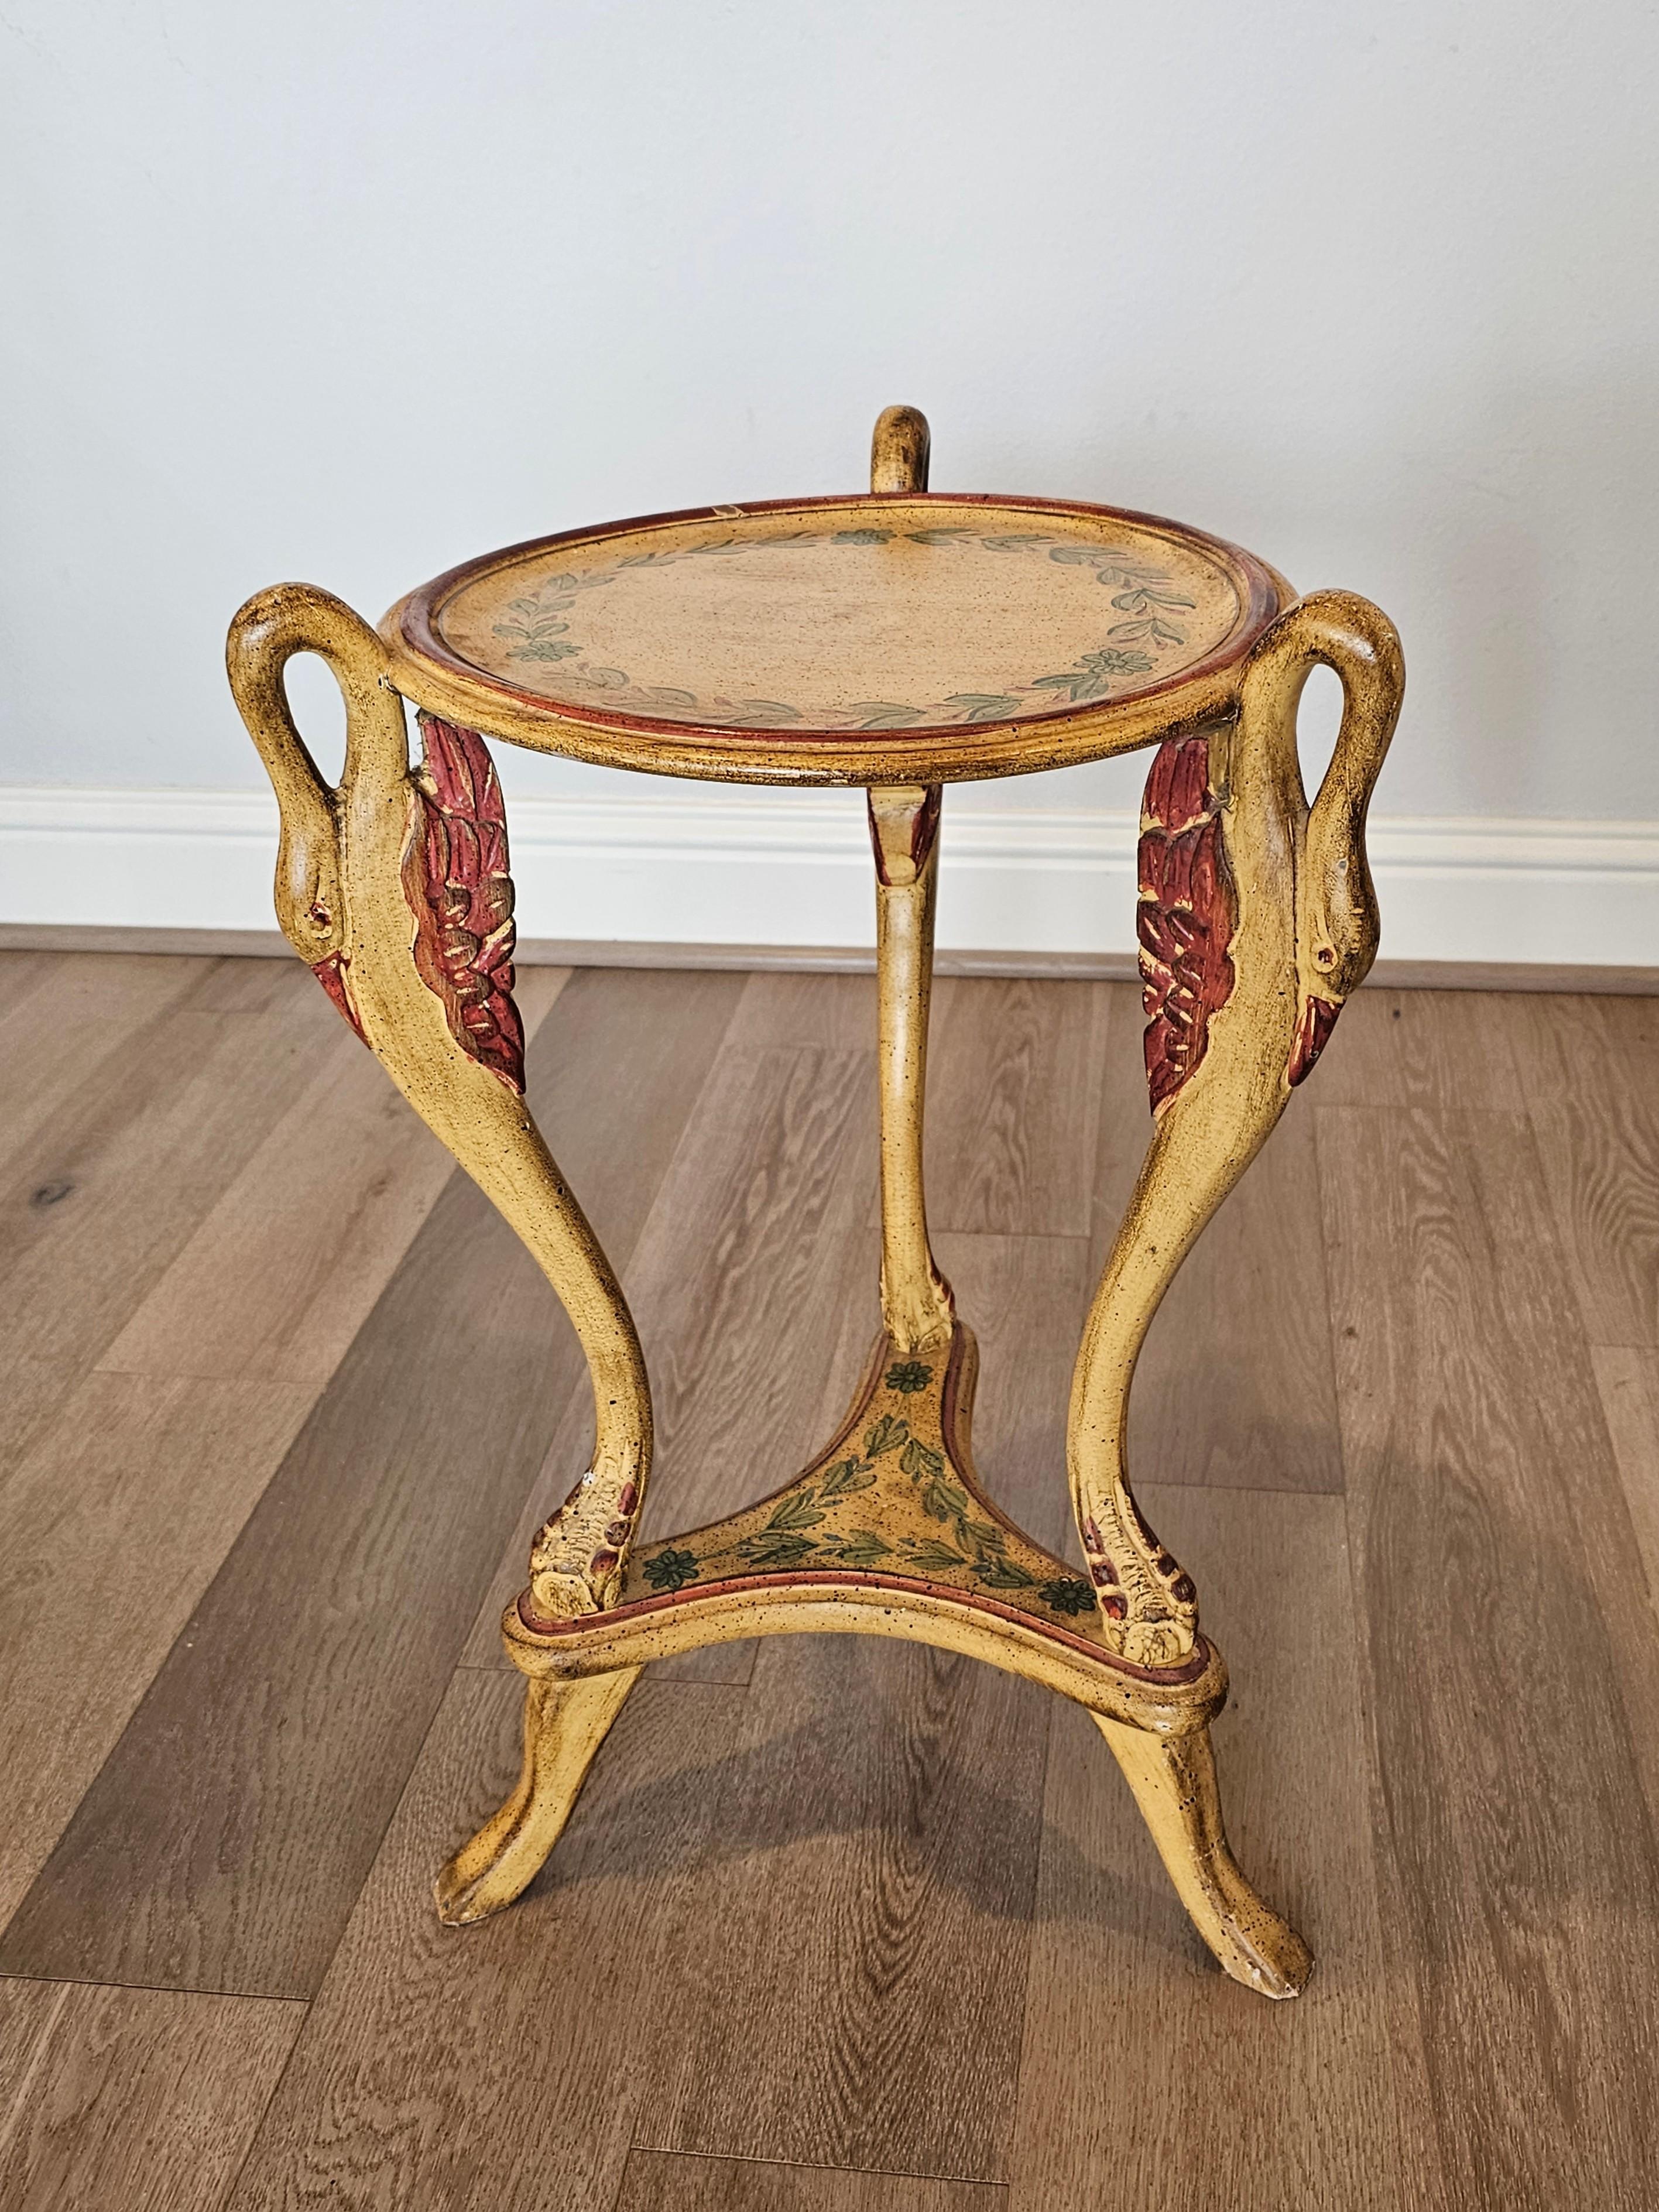 20th Century Vintage Neoclassical Revival Painted Swan Guéridon Table For Sale